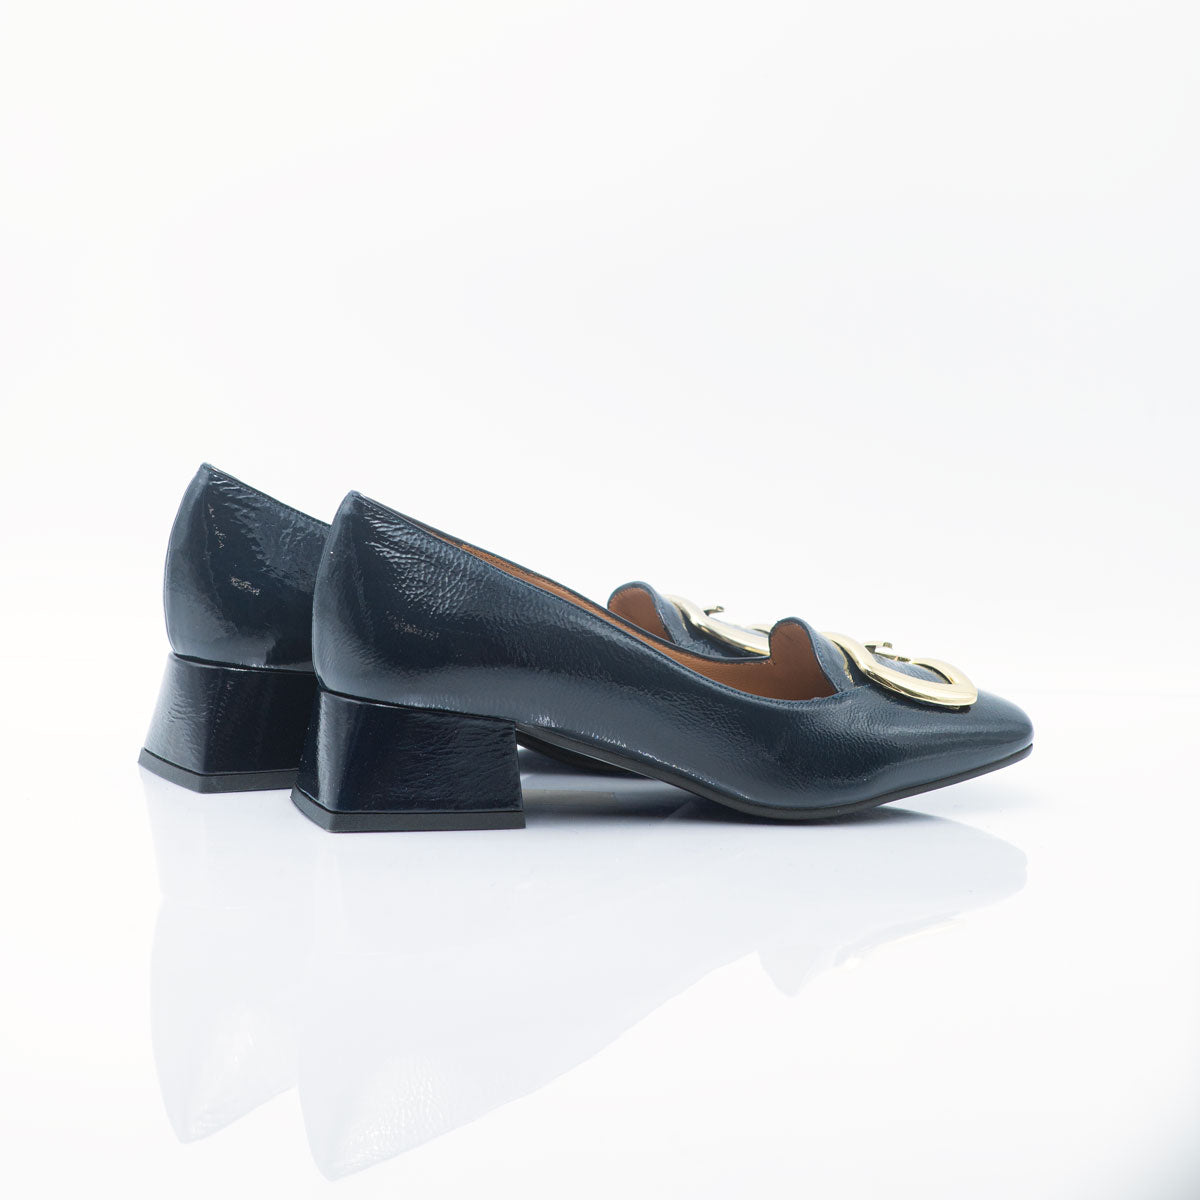 Figini - Blue square-toe Loafer with an Embossed gold buckle, 3cm heel